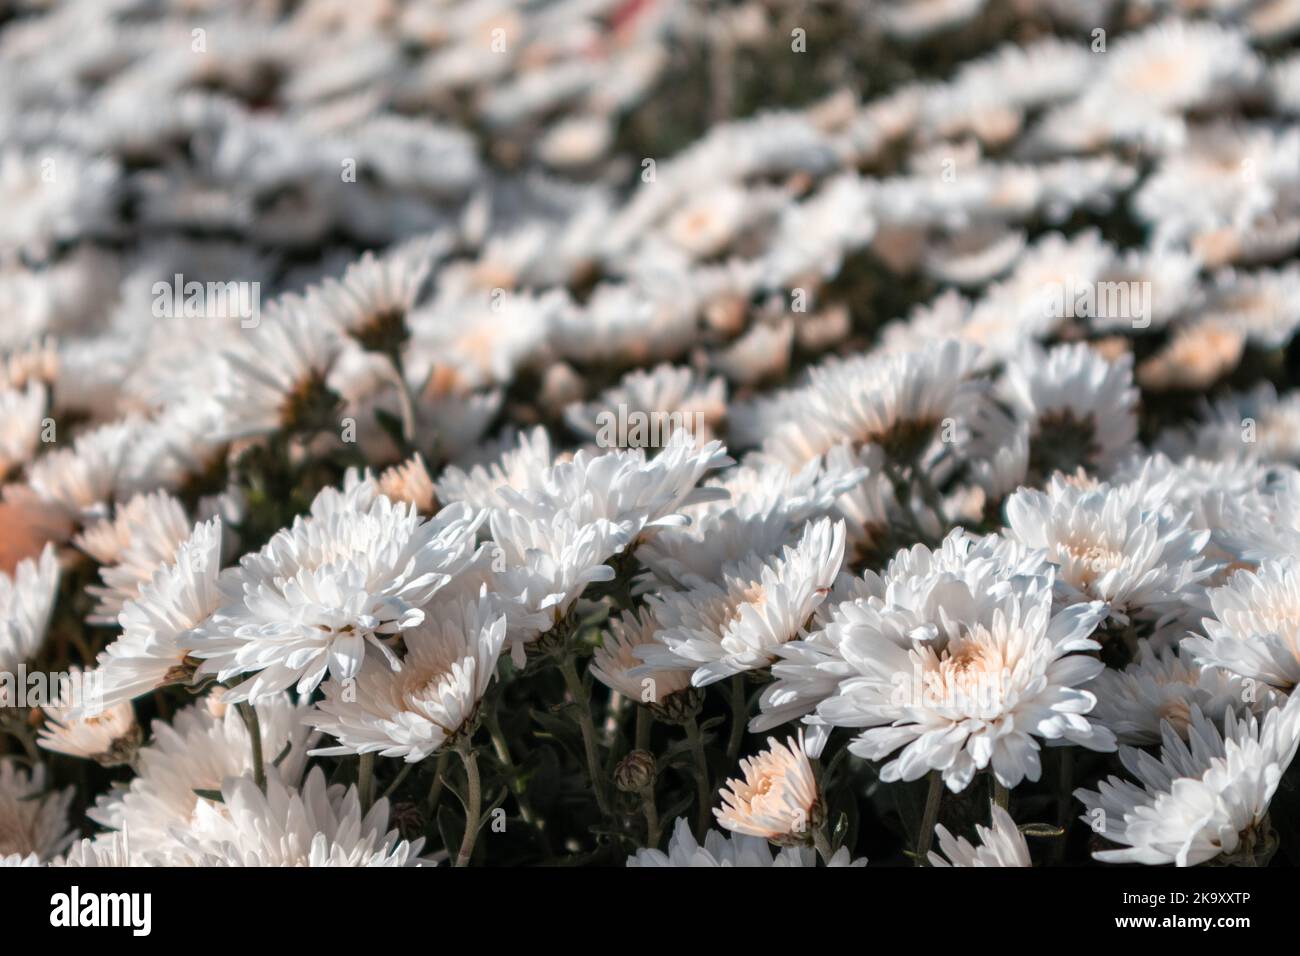 White pretty flowers blooming, sunny close-up. Chrysanthemums, chrysanths autumn flowerbed with blurred background Stock Photo